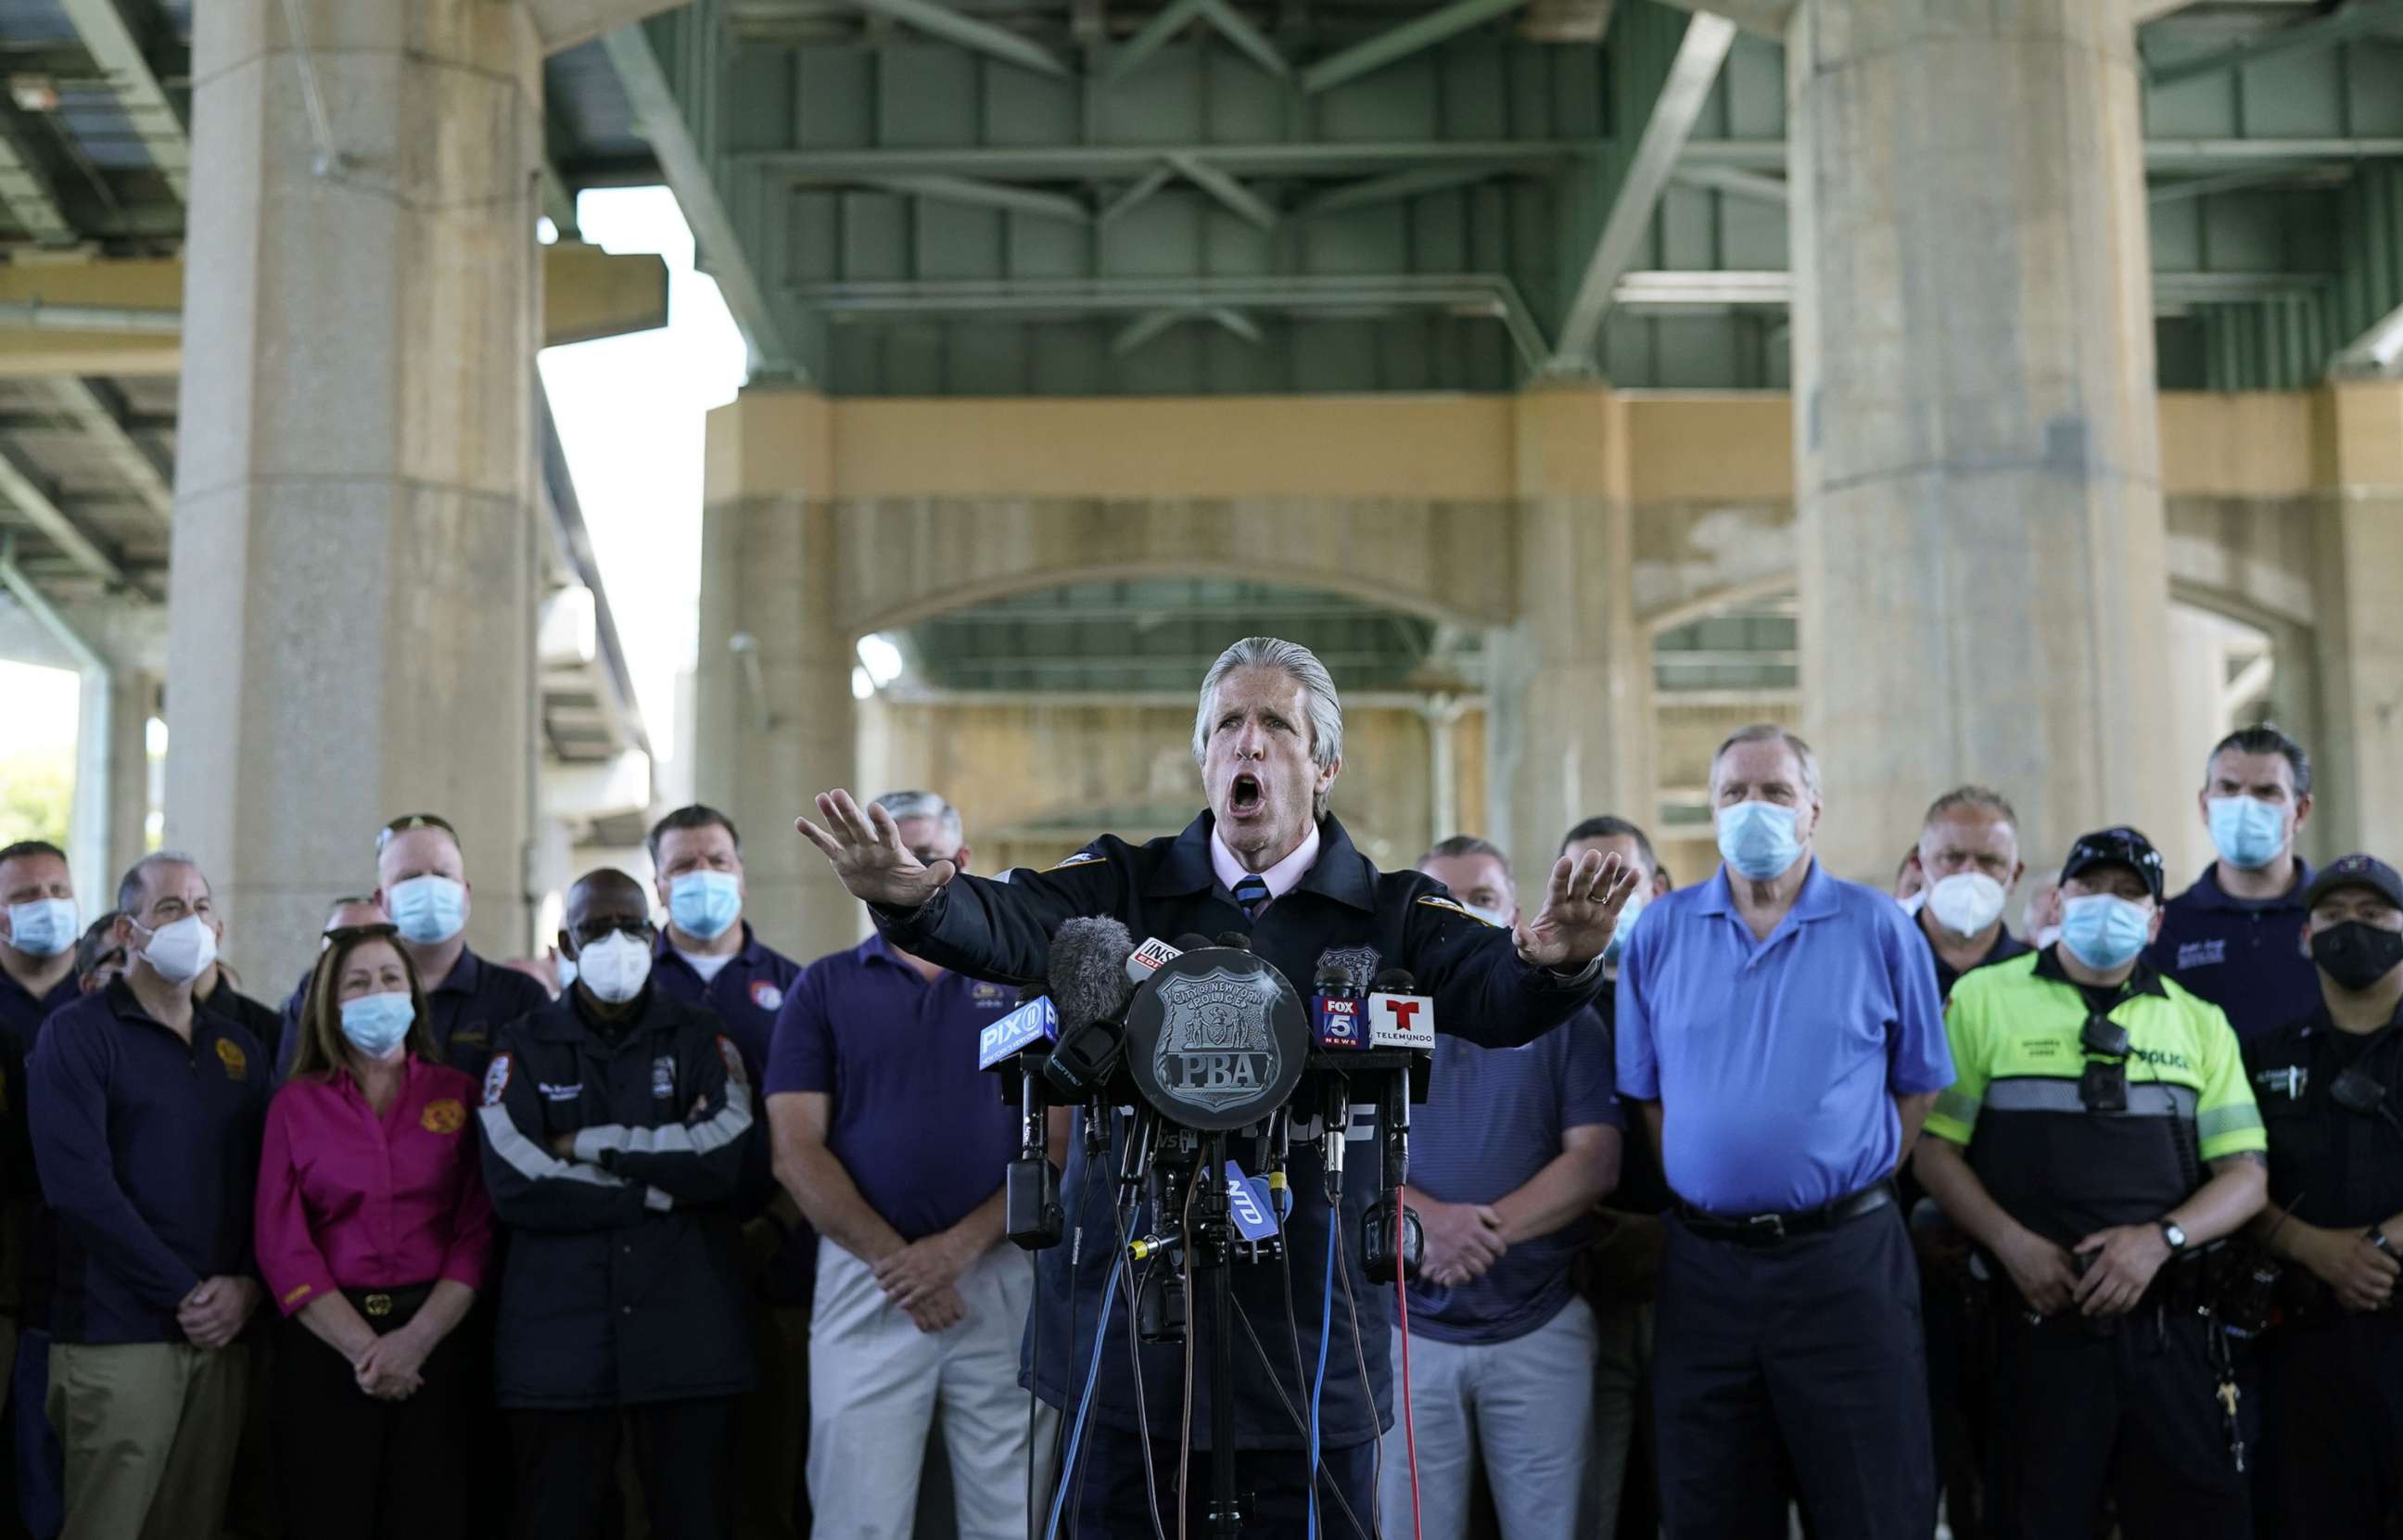 PHOTO: PBA President Pat Lynch speaks at a press conference, with representatives of other NYPD and law enforcement unions in attendance, at the Icahn Stadium parking lot in New York City, June 9, 2020.